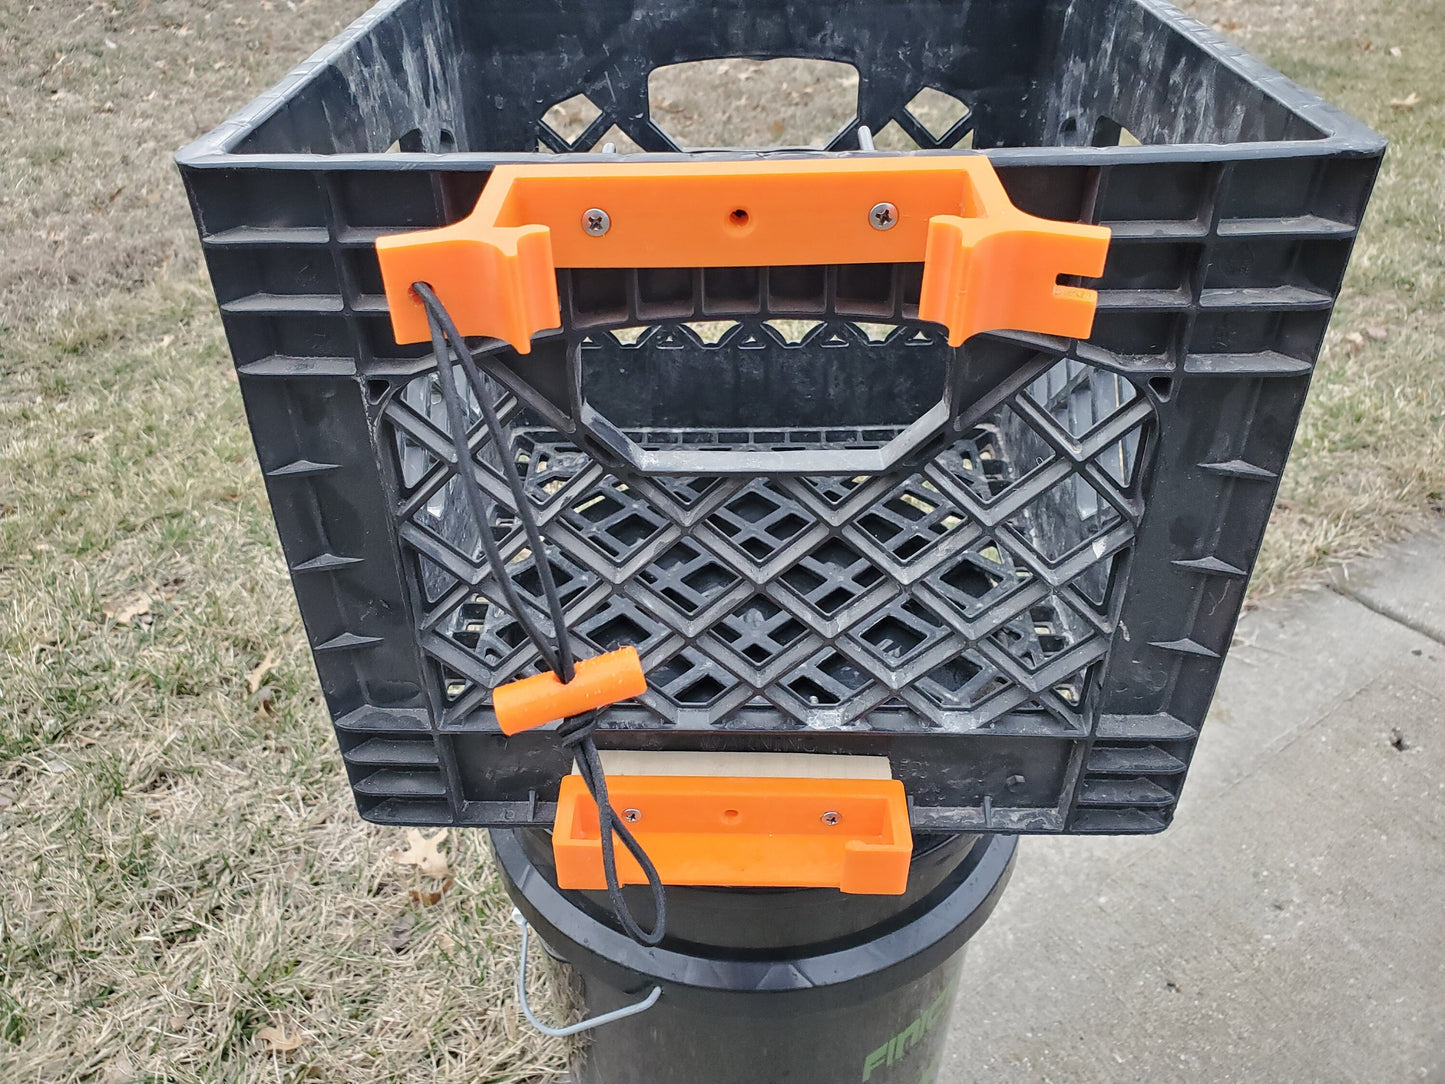 Clamp and base mounted to milk crate